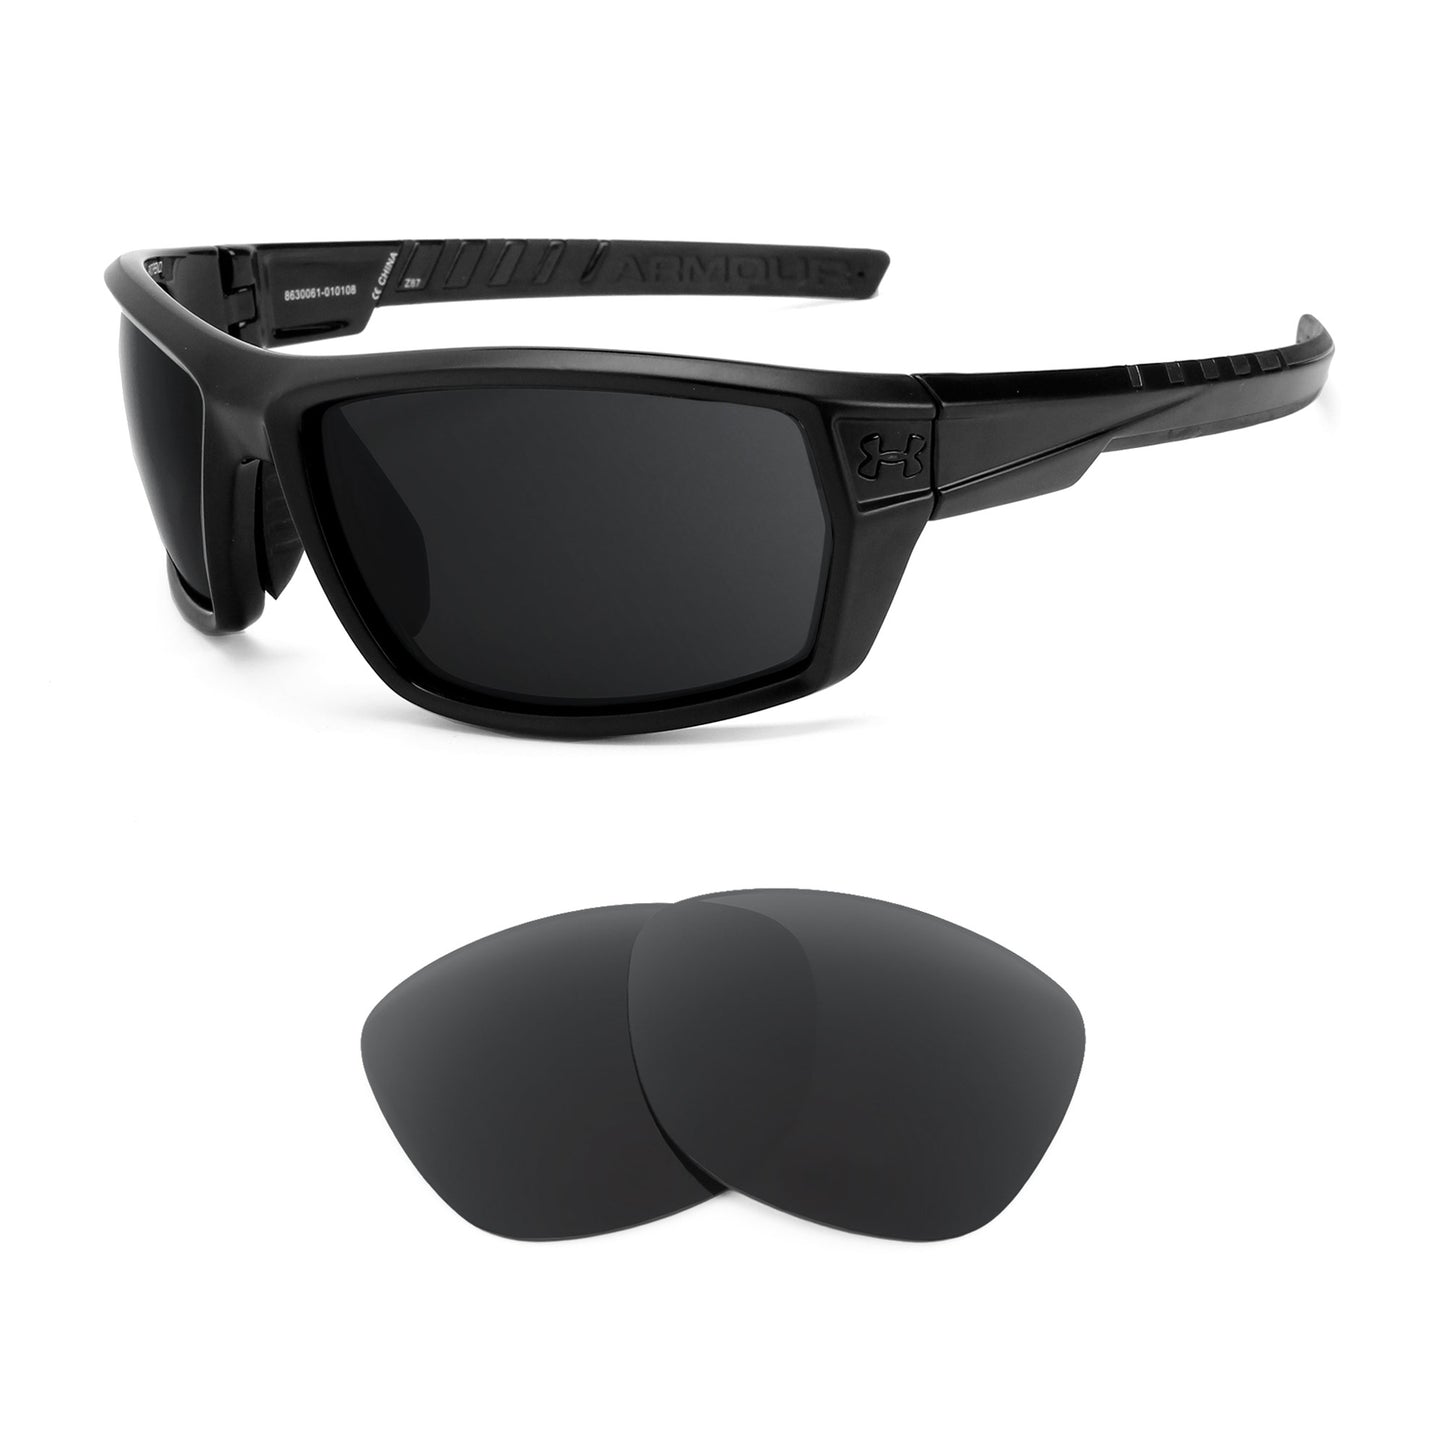 Under Armour Ranger sunglasses with replacement lenses